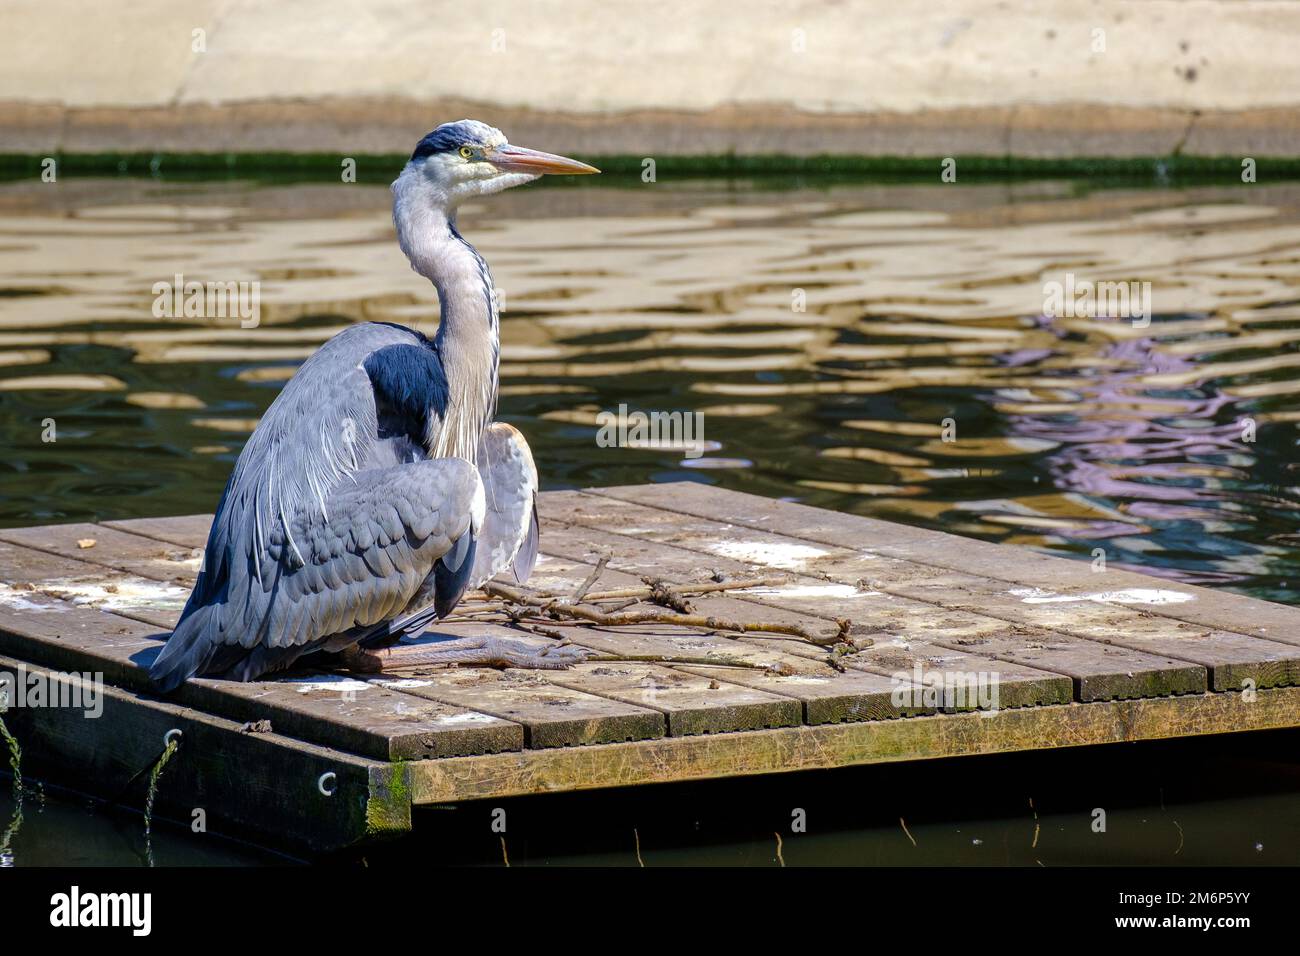 Adult grey heron with extended neck and long sharply pointed beak sits on raft in lake looking for prey. Stock Photo